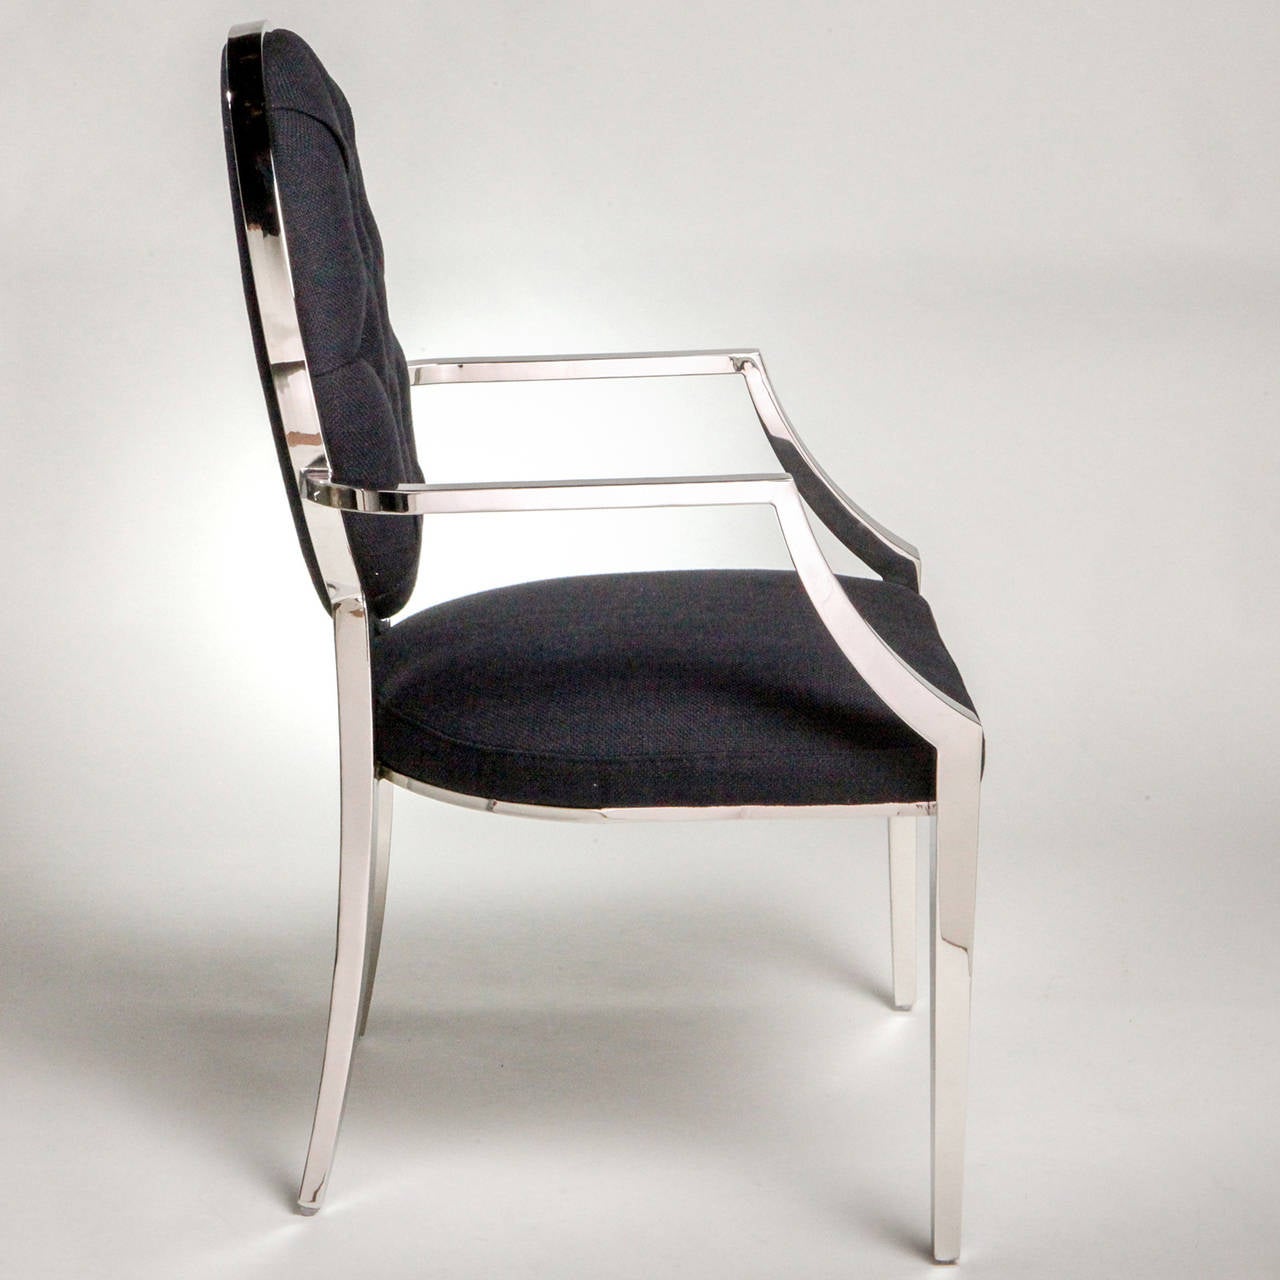 Stainless Steel Dining Chair For Sale At 1stdibs Modern Stainless